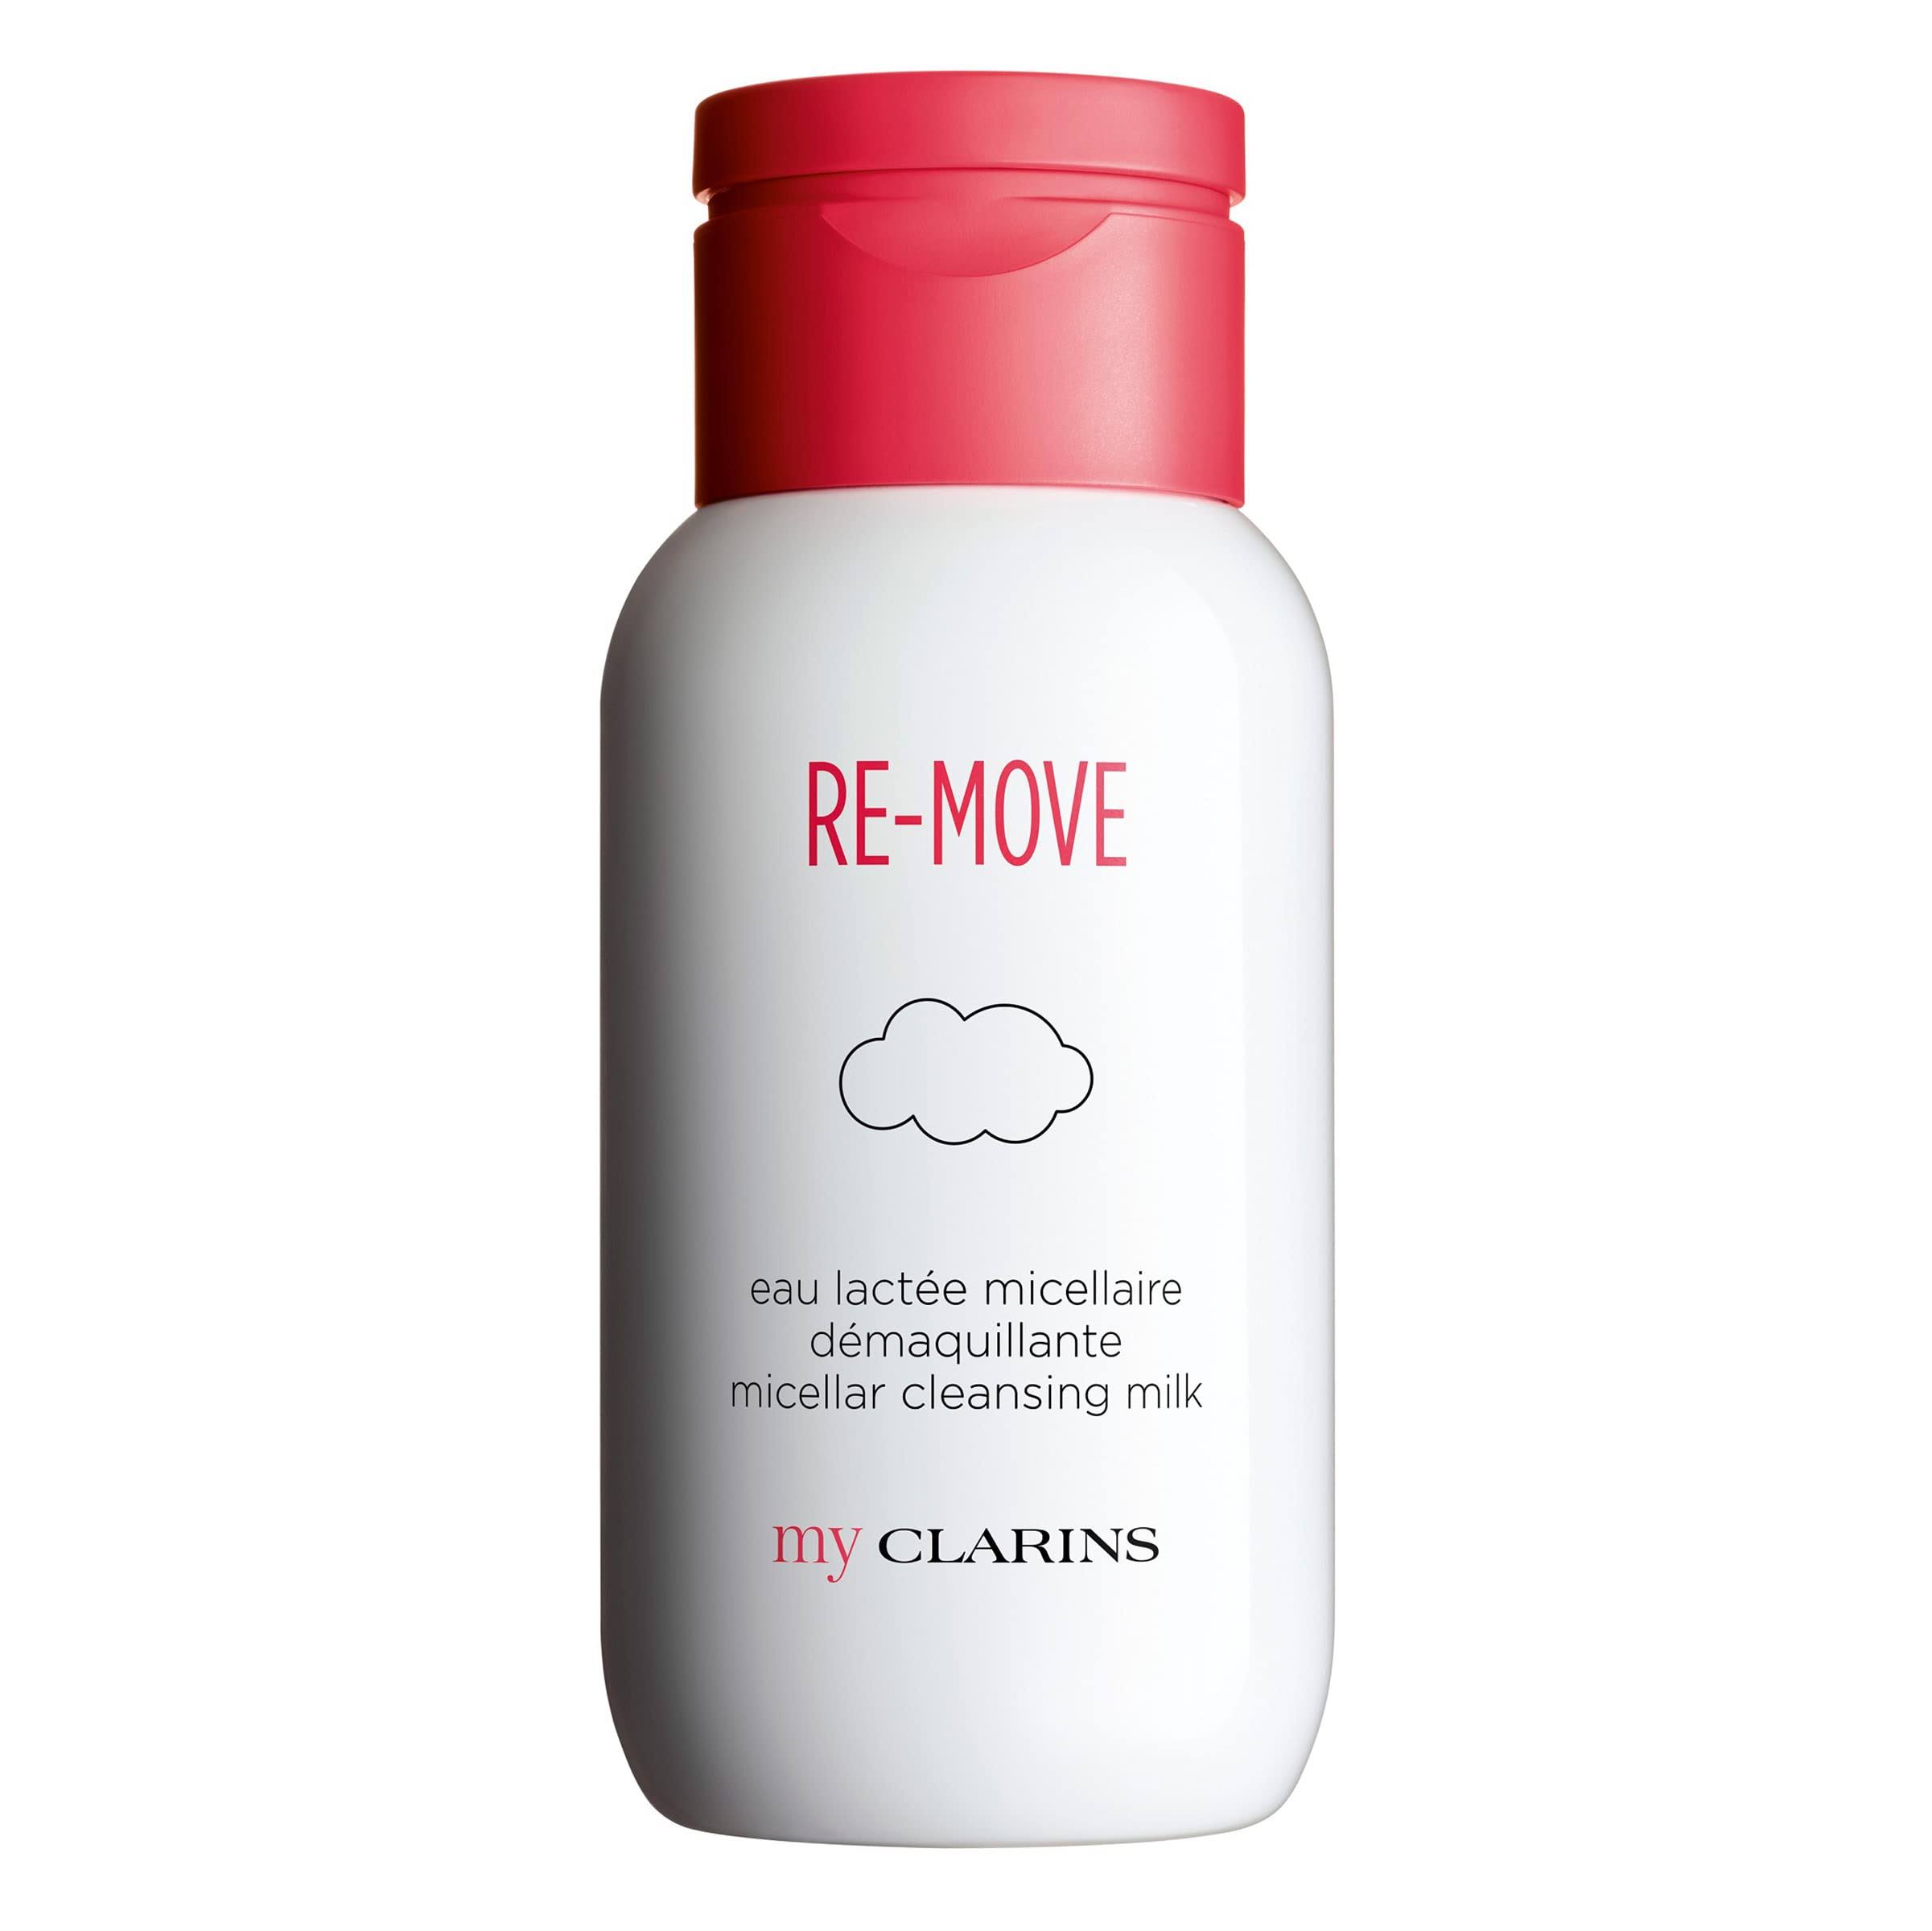 My Clarins Re-Move Micellar Cleansing Milk 200 ml